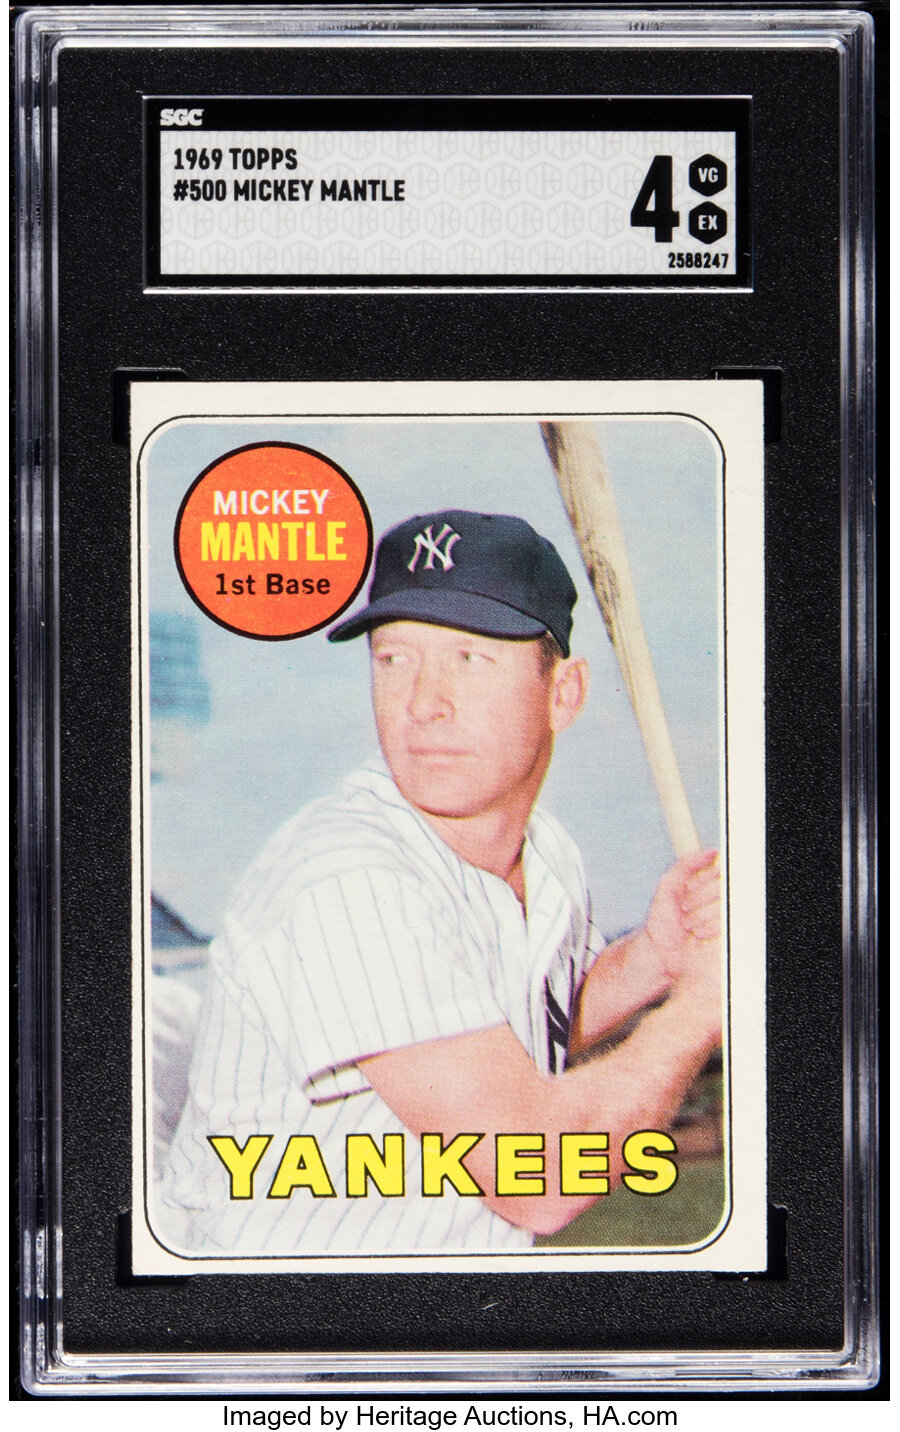 1969 Topps Mickey Mantle (Last Name In Yellow) #500 SGC VG/EX 4